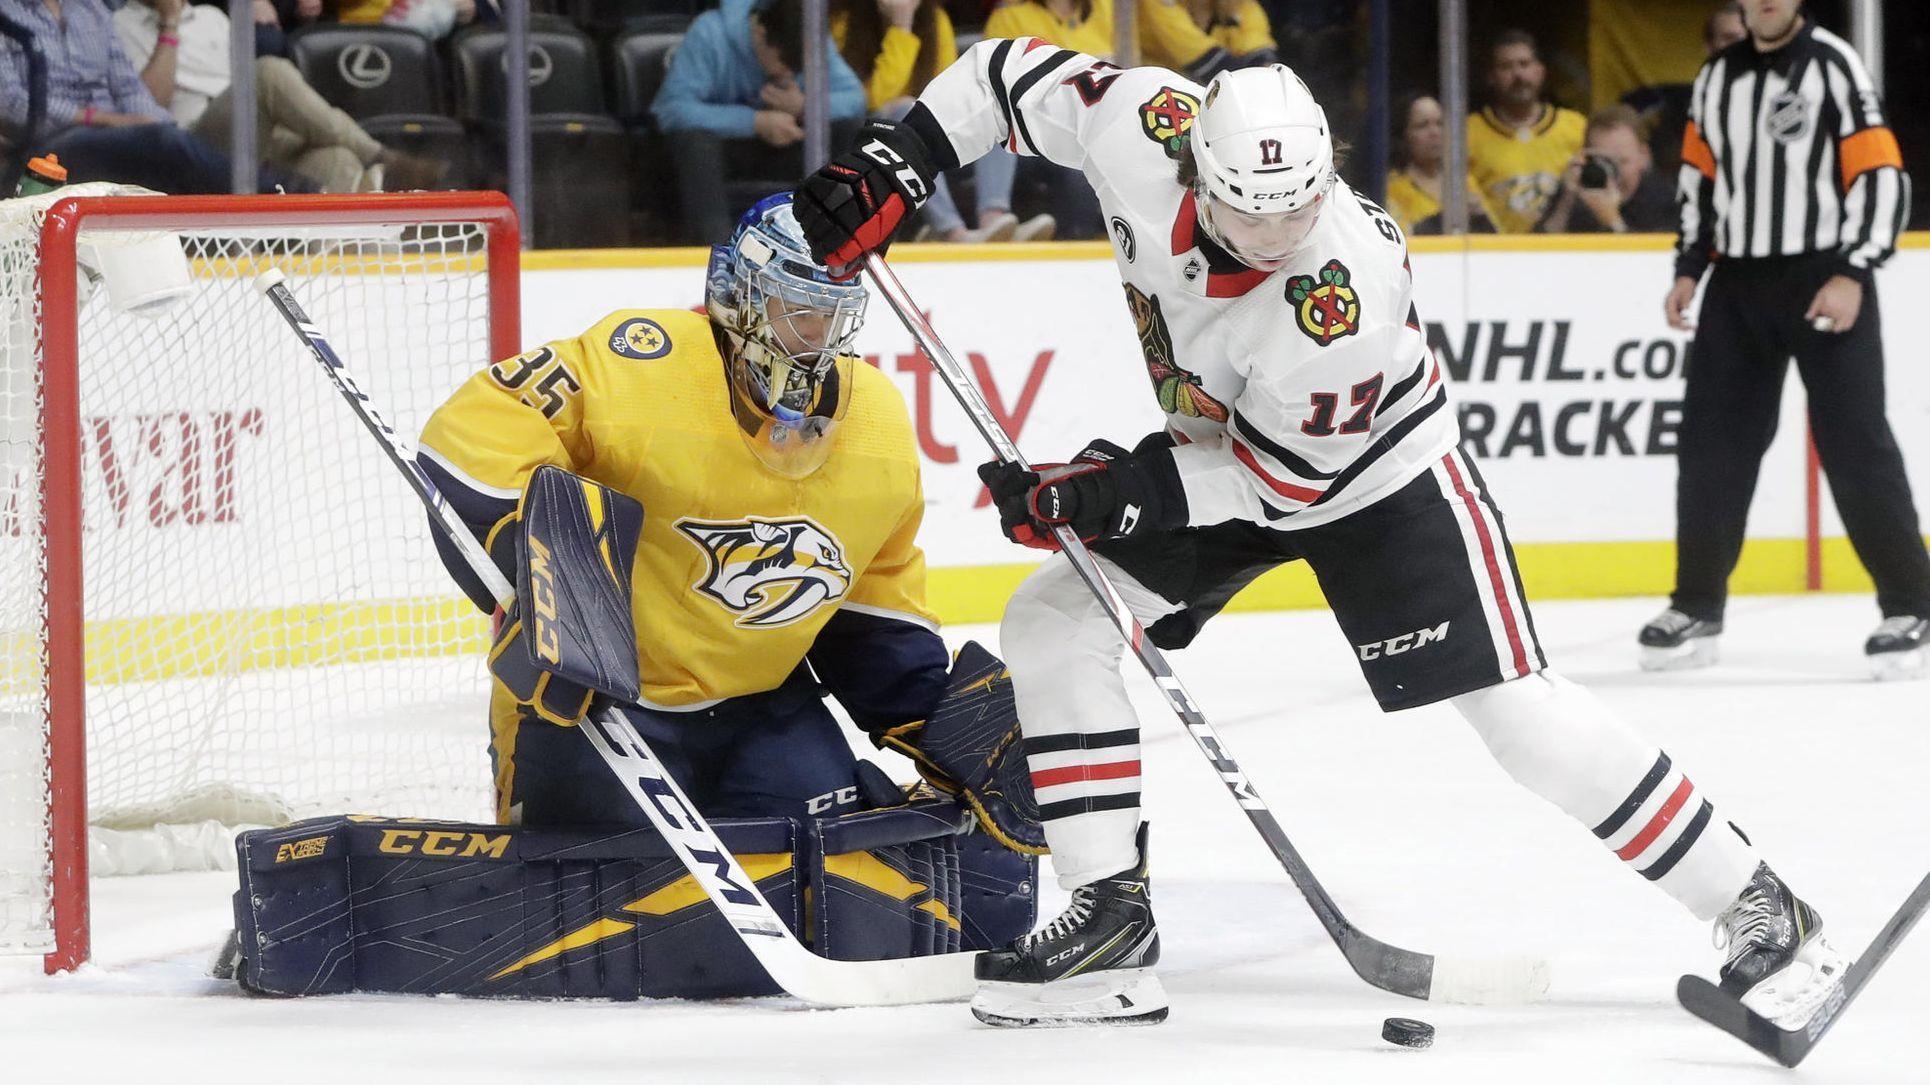 3 takeaways from the Blackhawks' 5-2 loss in the season finale, including a candid Duncan Keith: 'It's just frustrating'